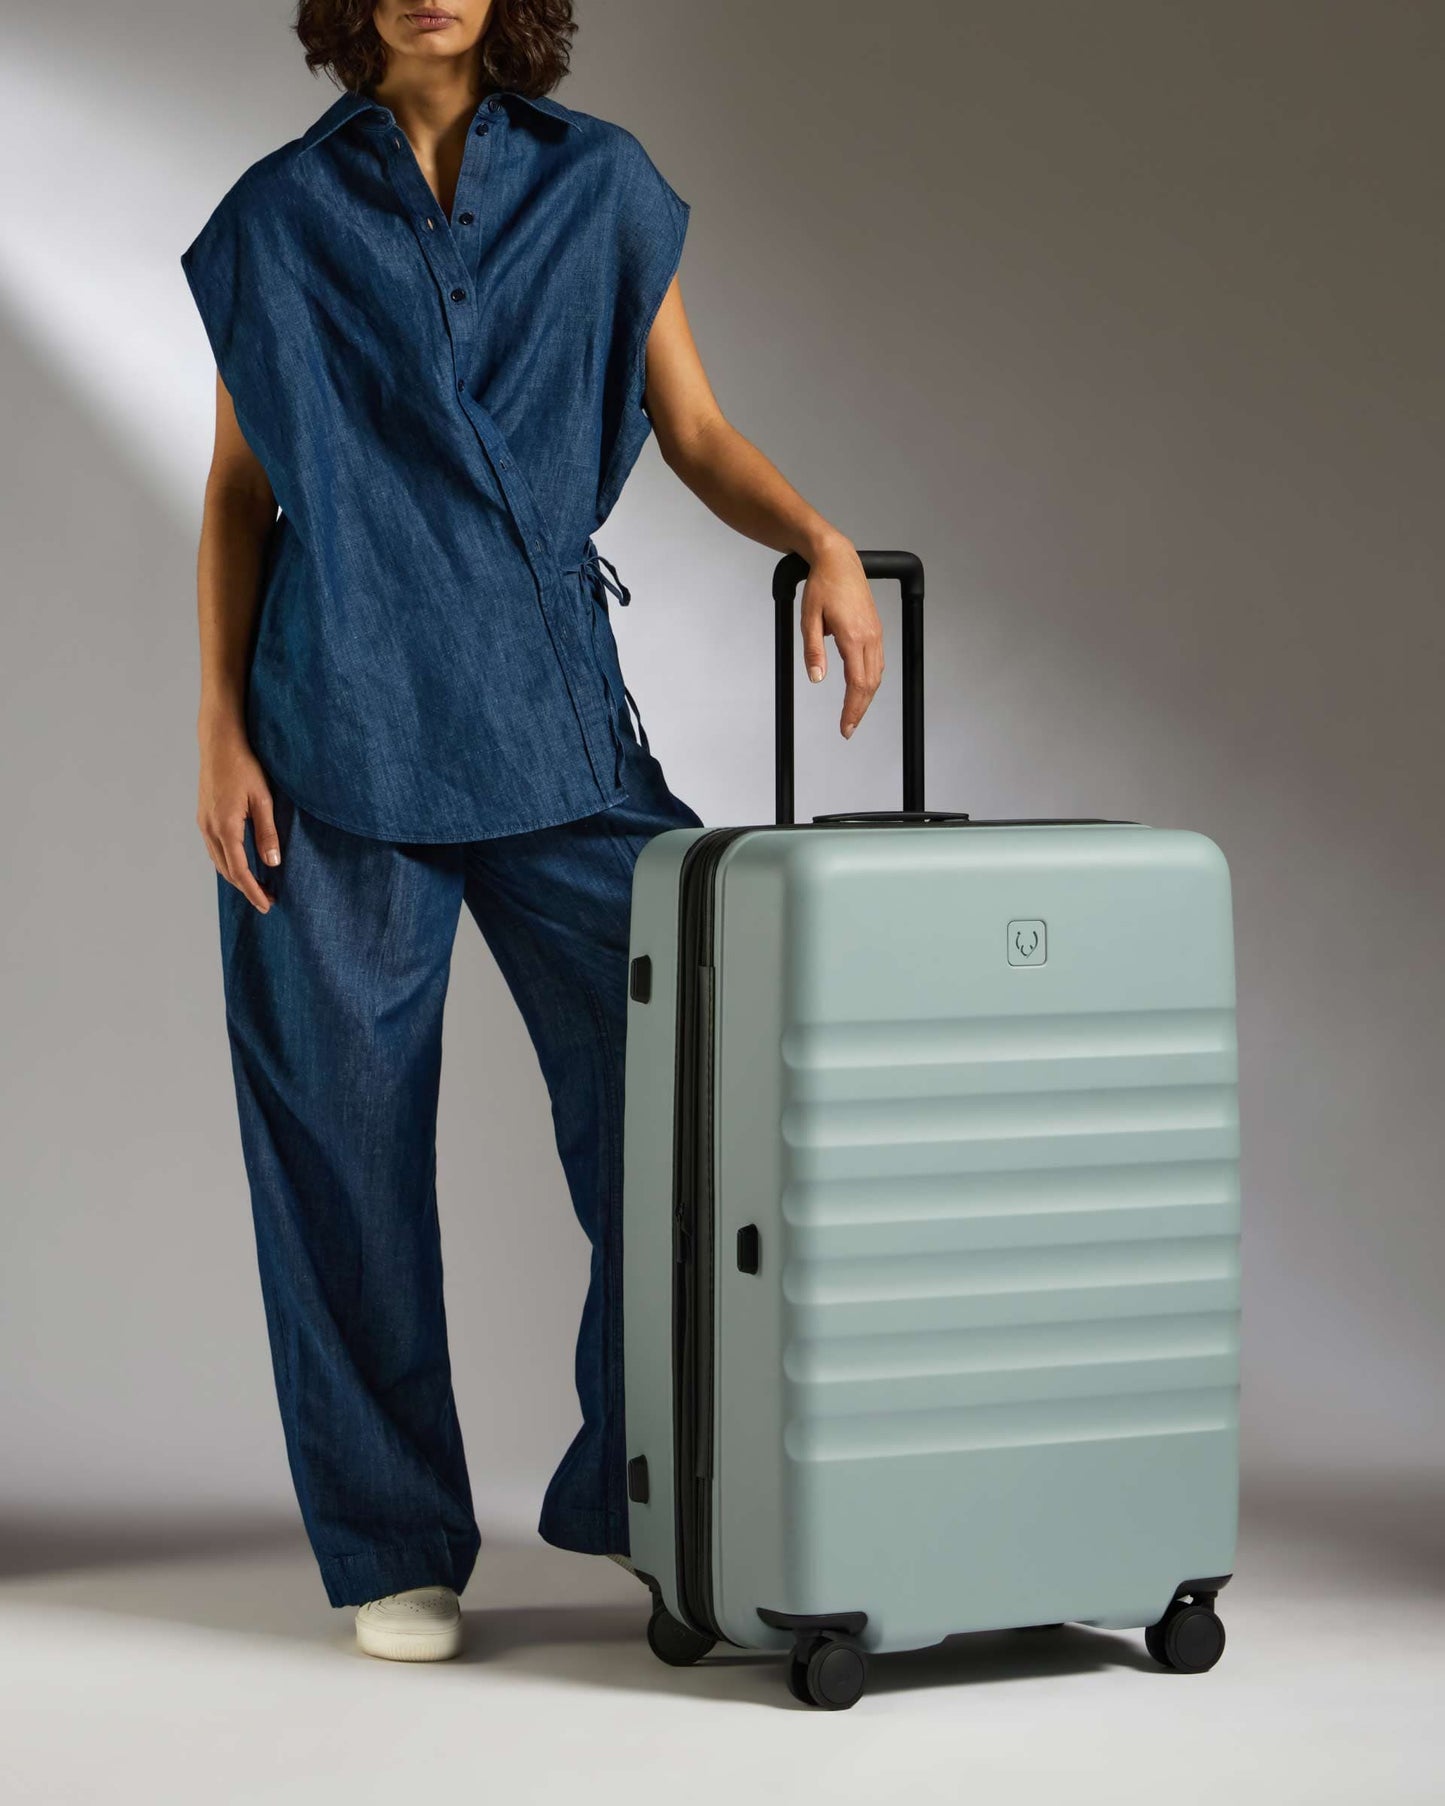 Antler Luggage -  Icon Stripe Large in Mist Blue - Hard Suitcase Icon Stripe Large Suitcase in Blue | Lightweight & Hard Shell Suitcase